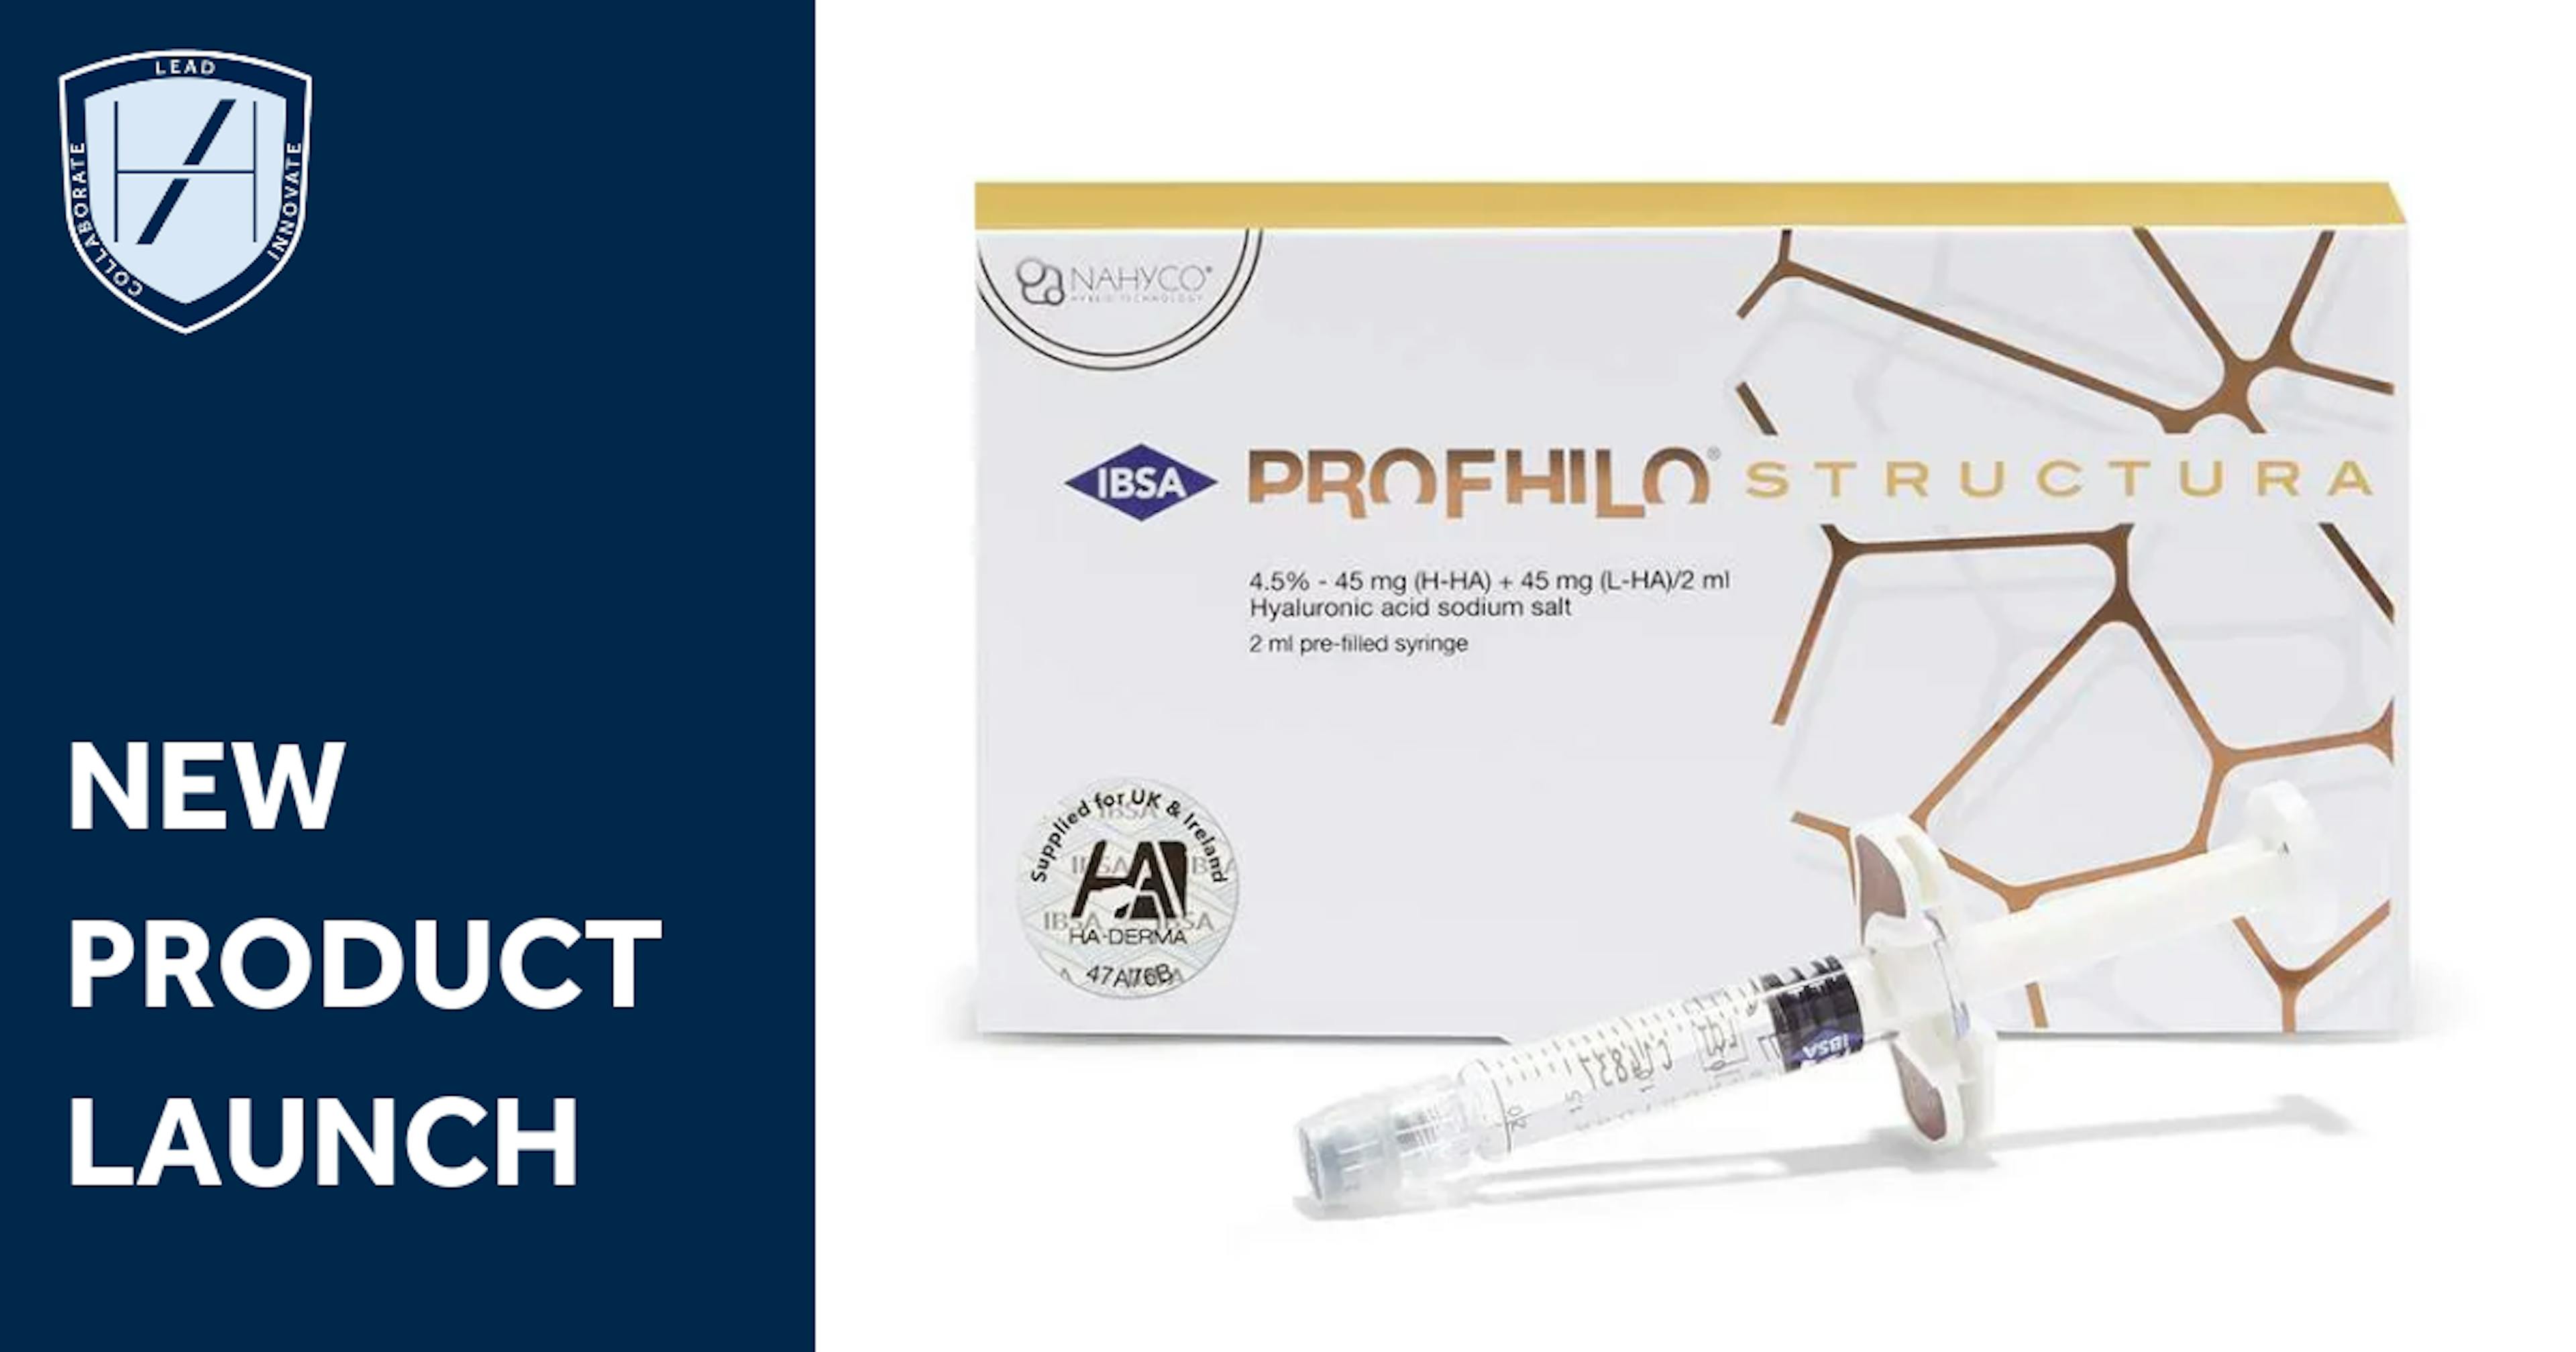 Profhilo Structura new regenerative skin treatment cosmetic injectable training at Harley Academy